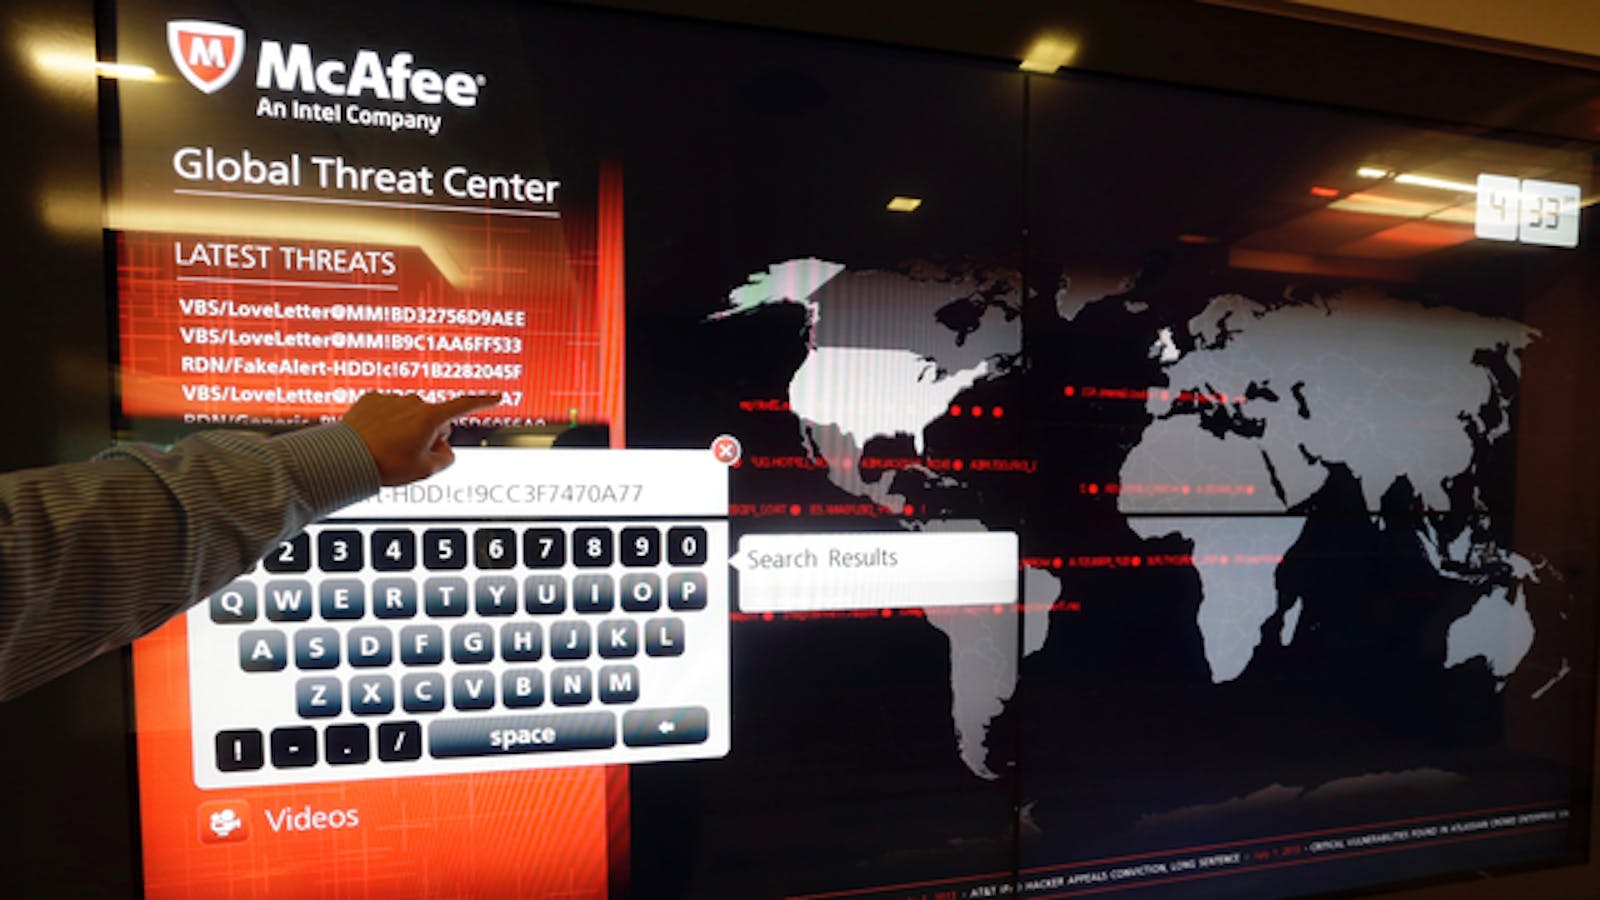 McAfee's Global Threat Center. Photo by AP.